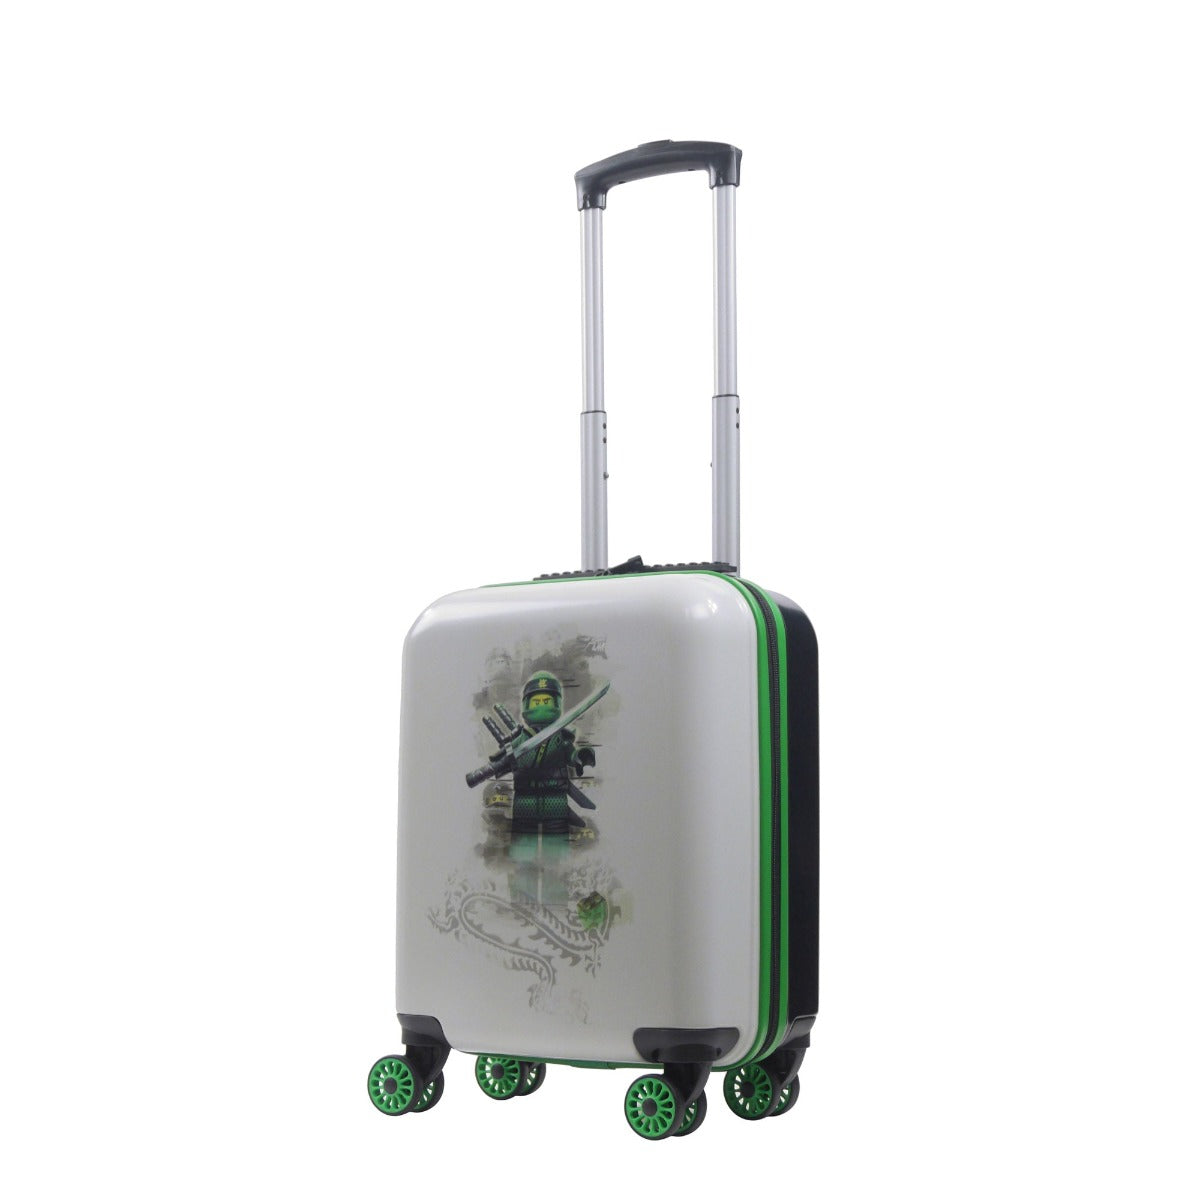 White Lego Play Date Ninjago 18" kids carry-on rolling luggage spinner suitcase